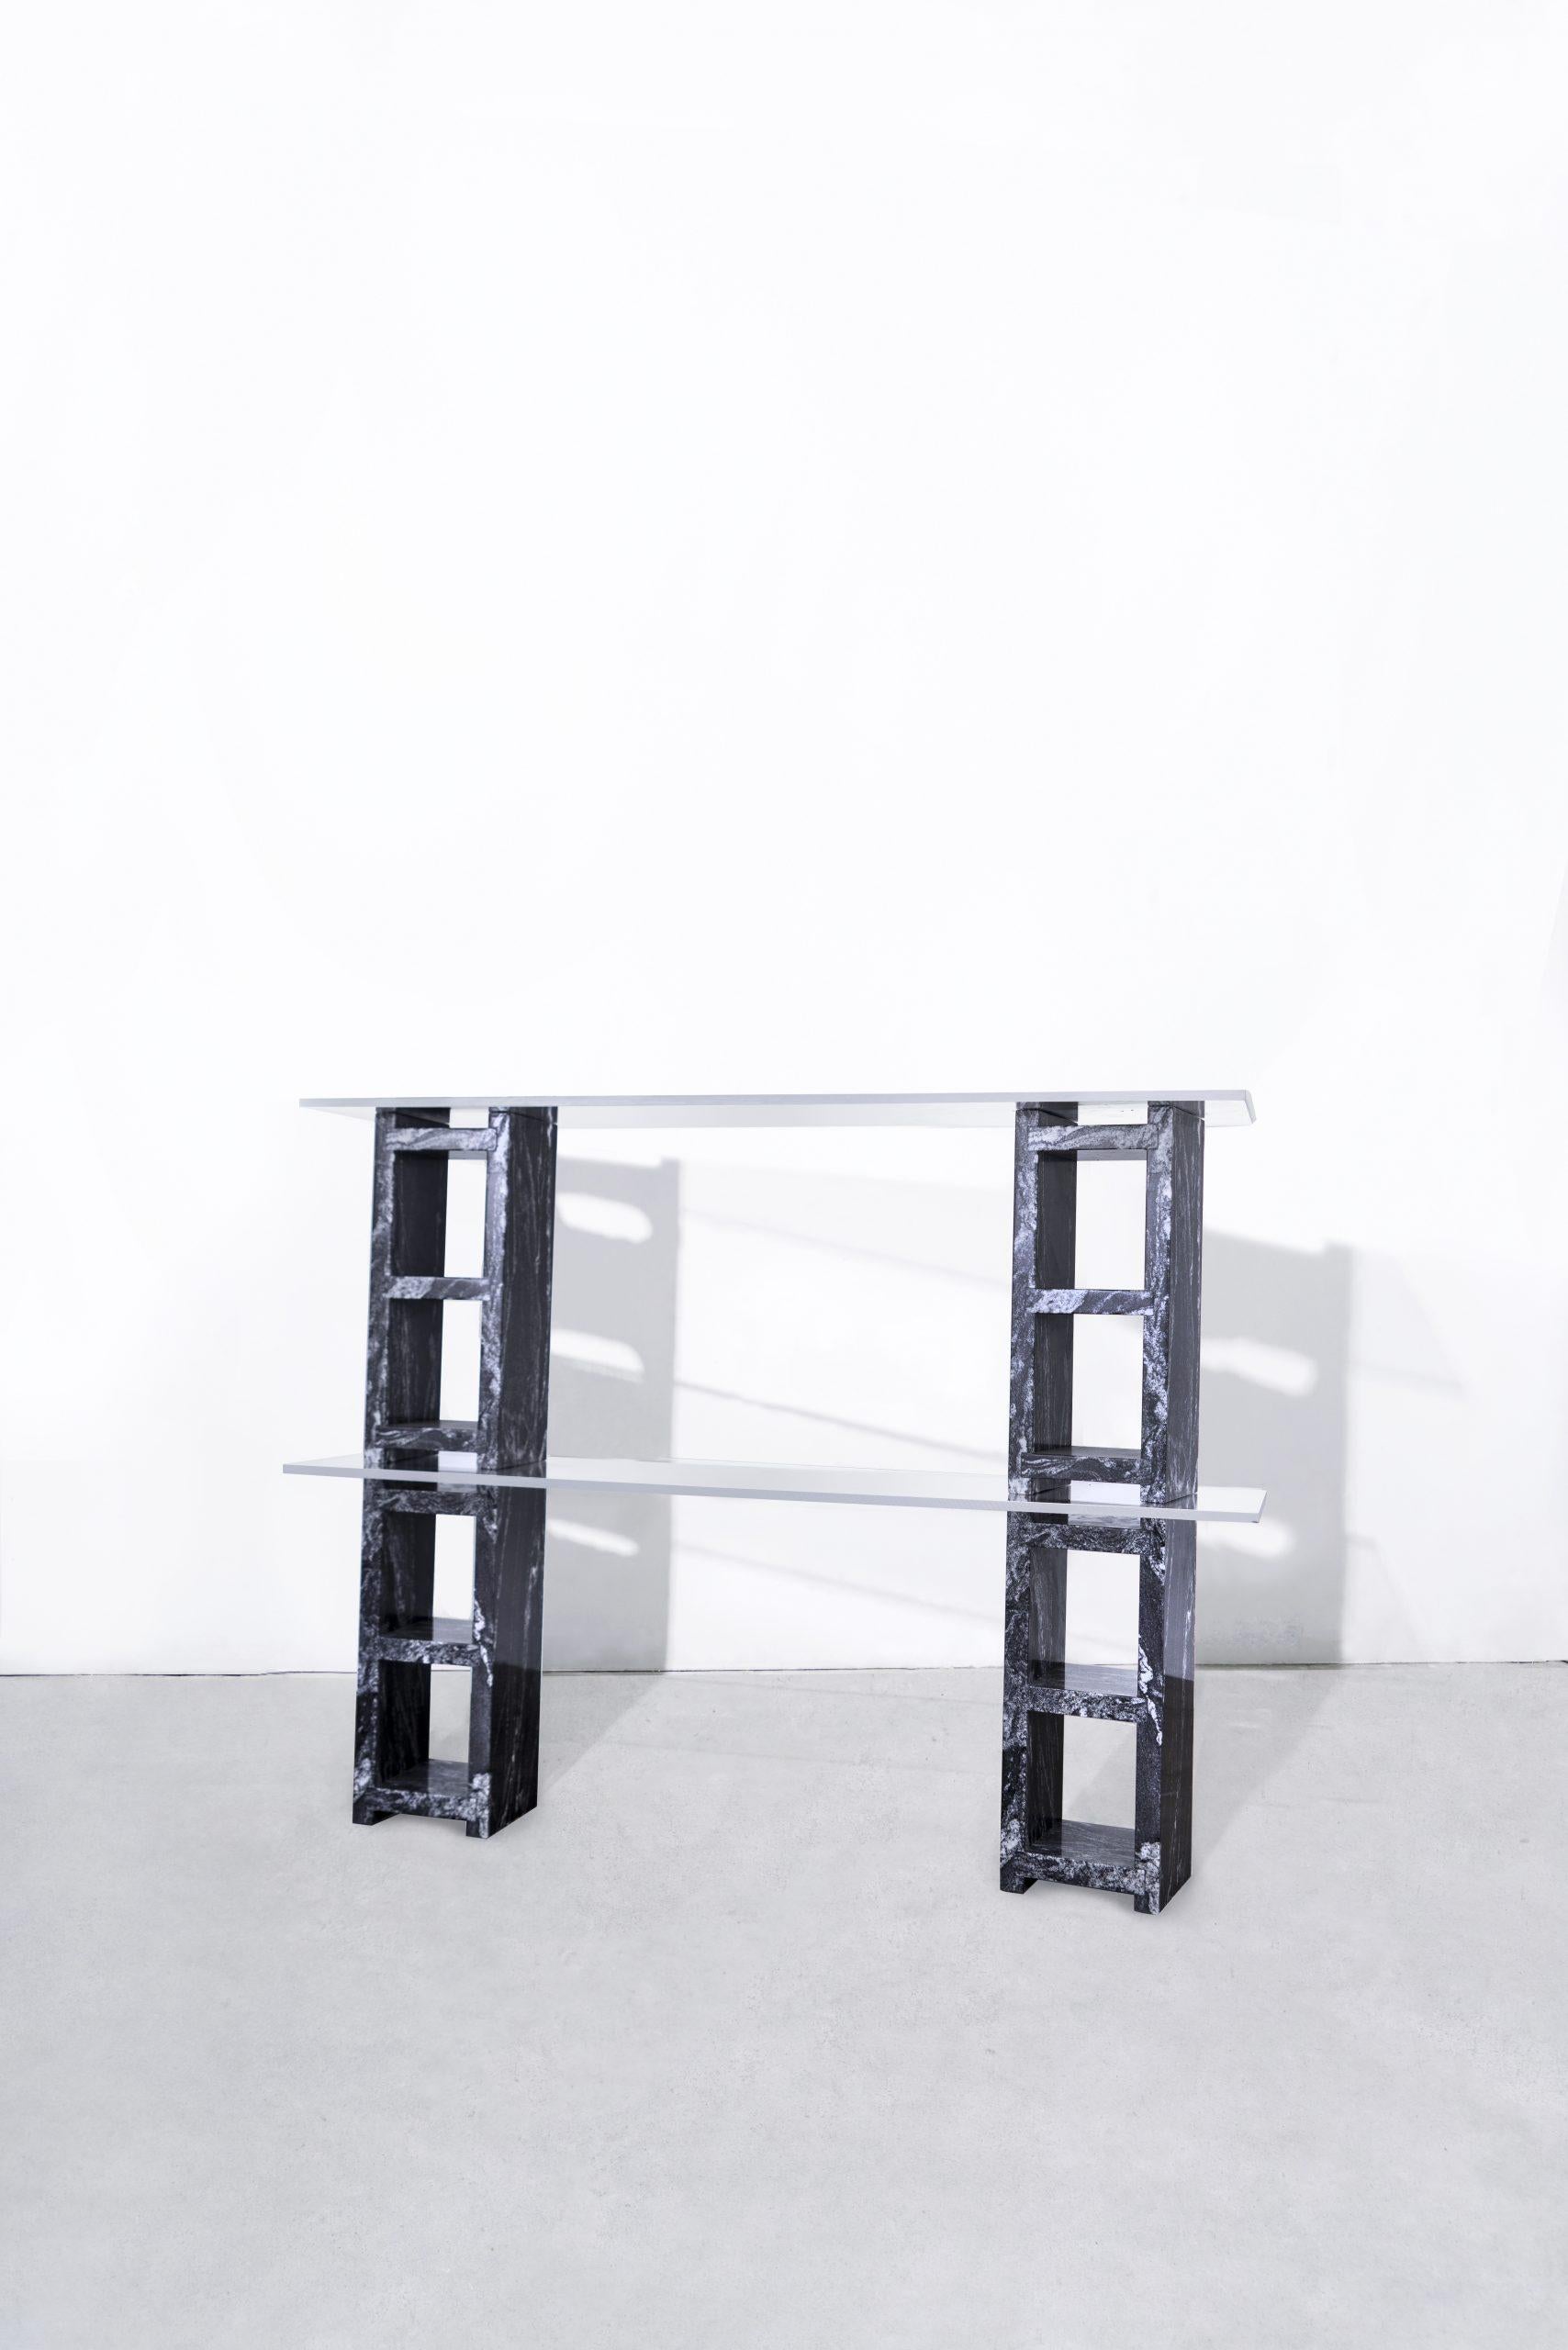 4 water jet cut, hand-polished nero marquina marble blocks, supporting 2 tempered glass shelves.
Starphire glass shelves.
Modular.
Made to order in nyc.

Dimensions
Cinder Block length 18.75?
Cinder block width 7.5” 
Cinder block thickness